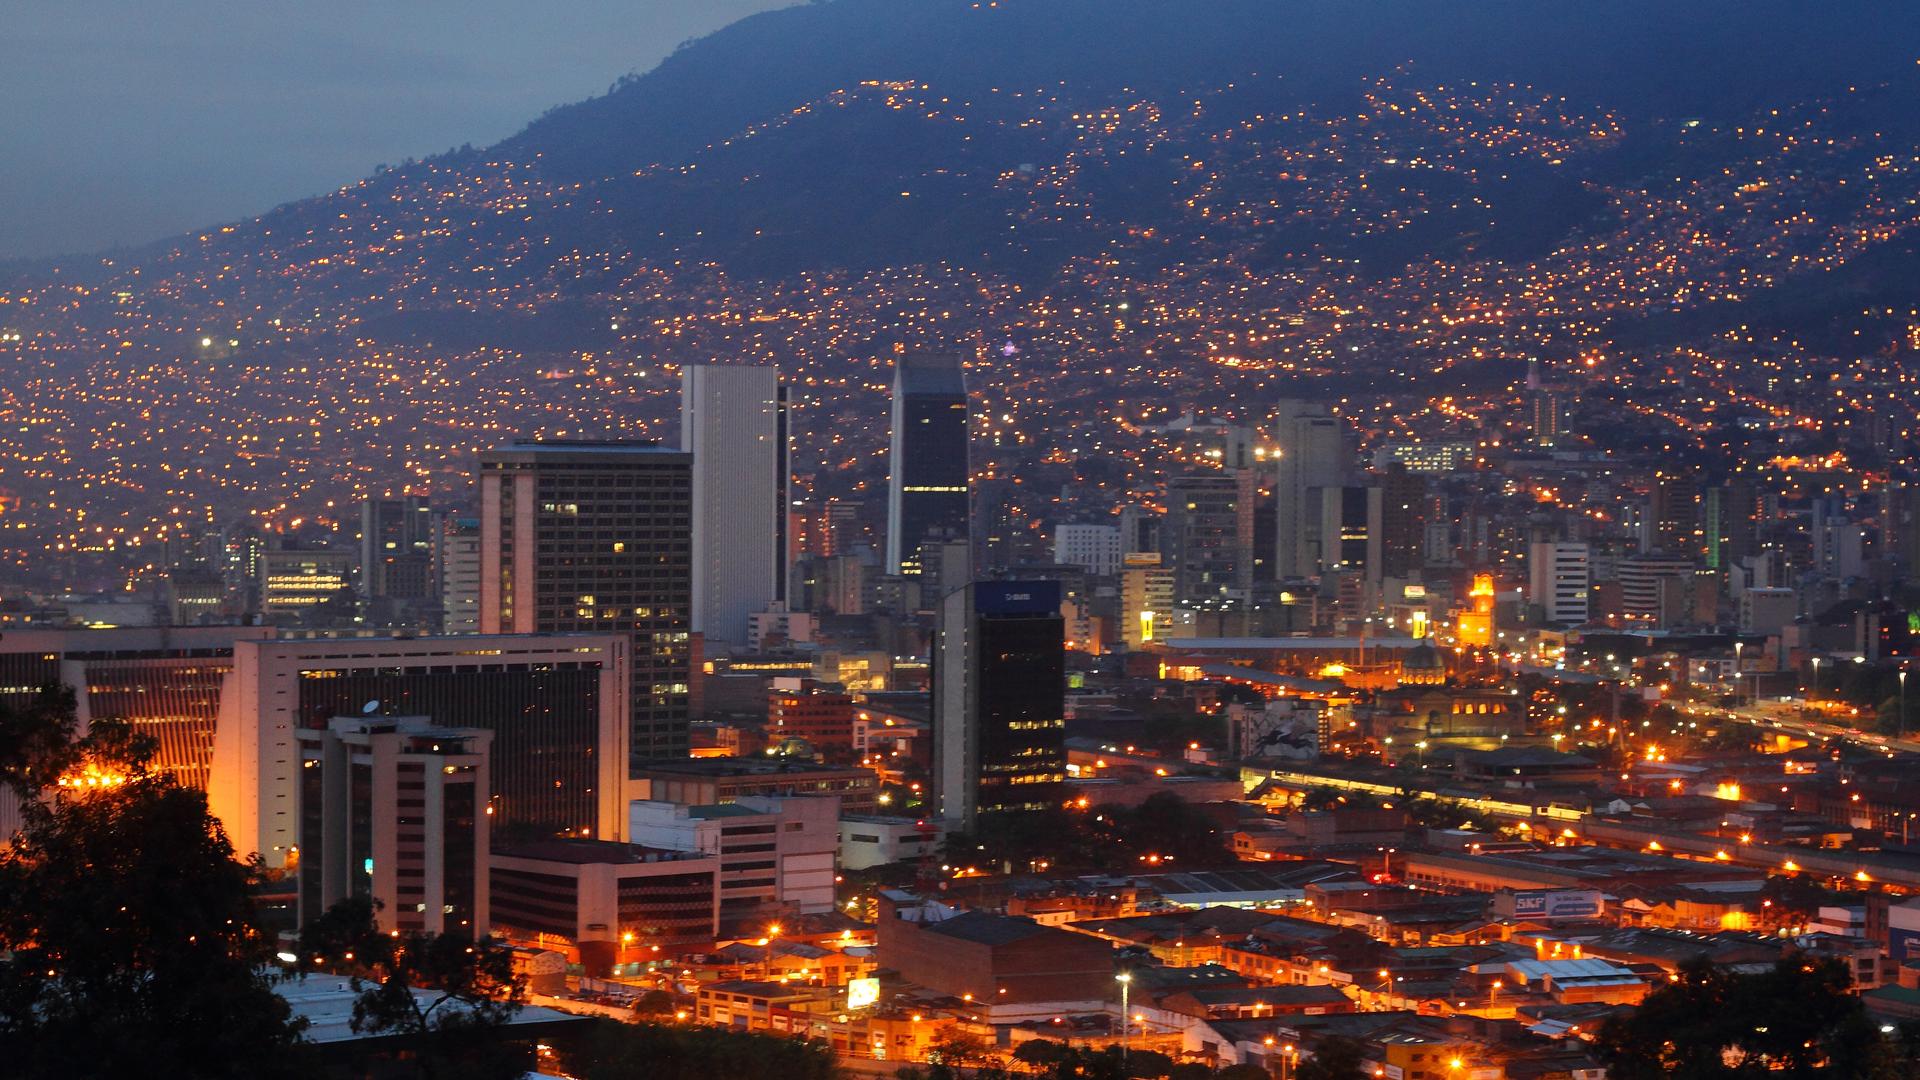 The picturesque Colombian city of Medellín is featured prominently in the TV show 